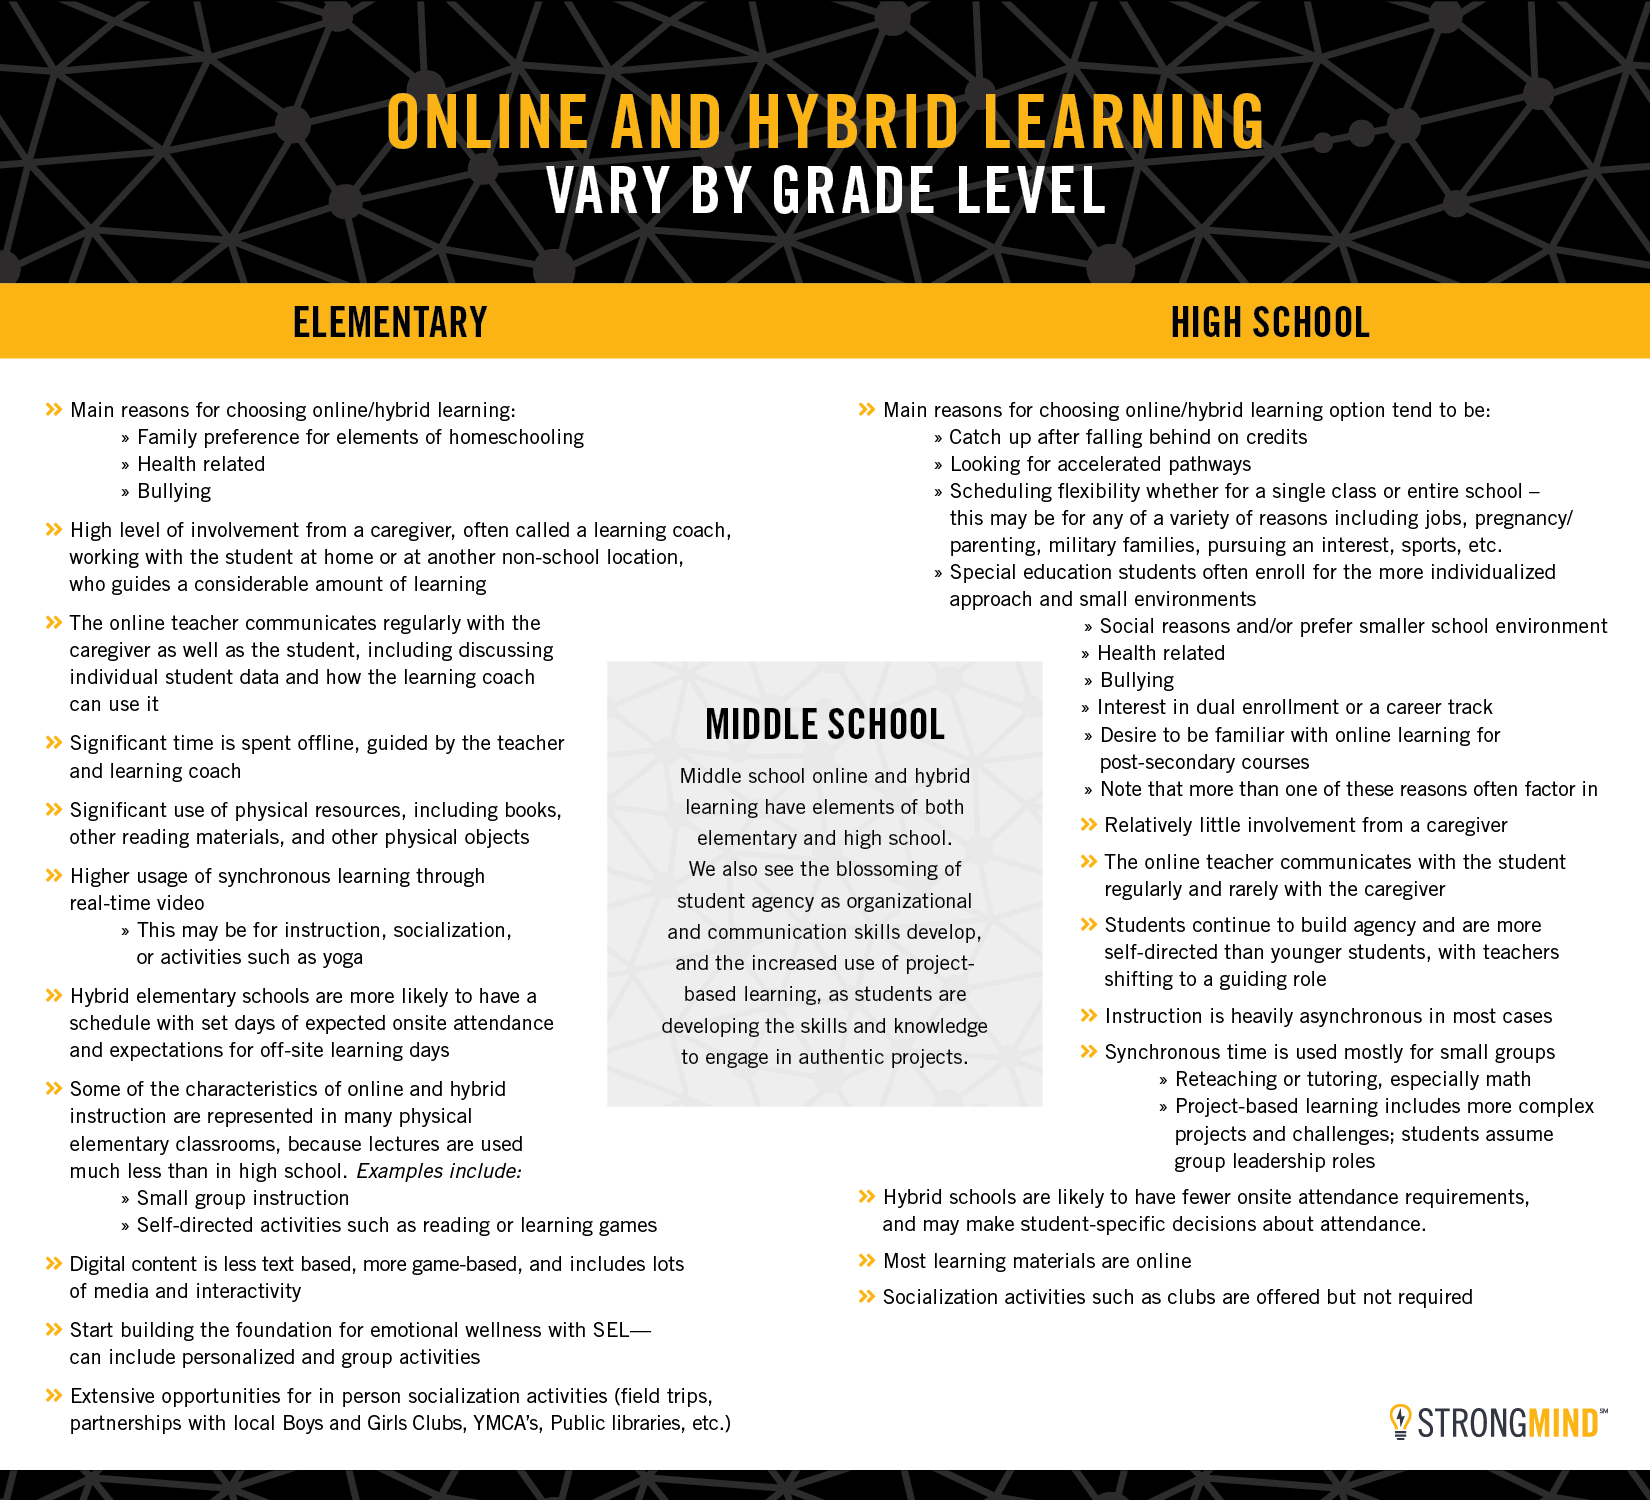 Graphic showing differences among grade levels for hybrid learning